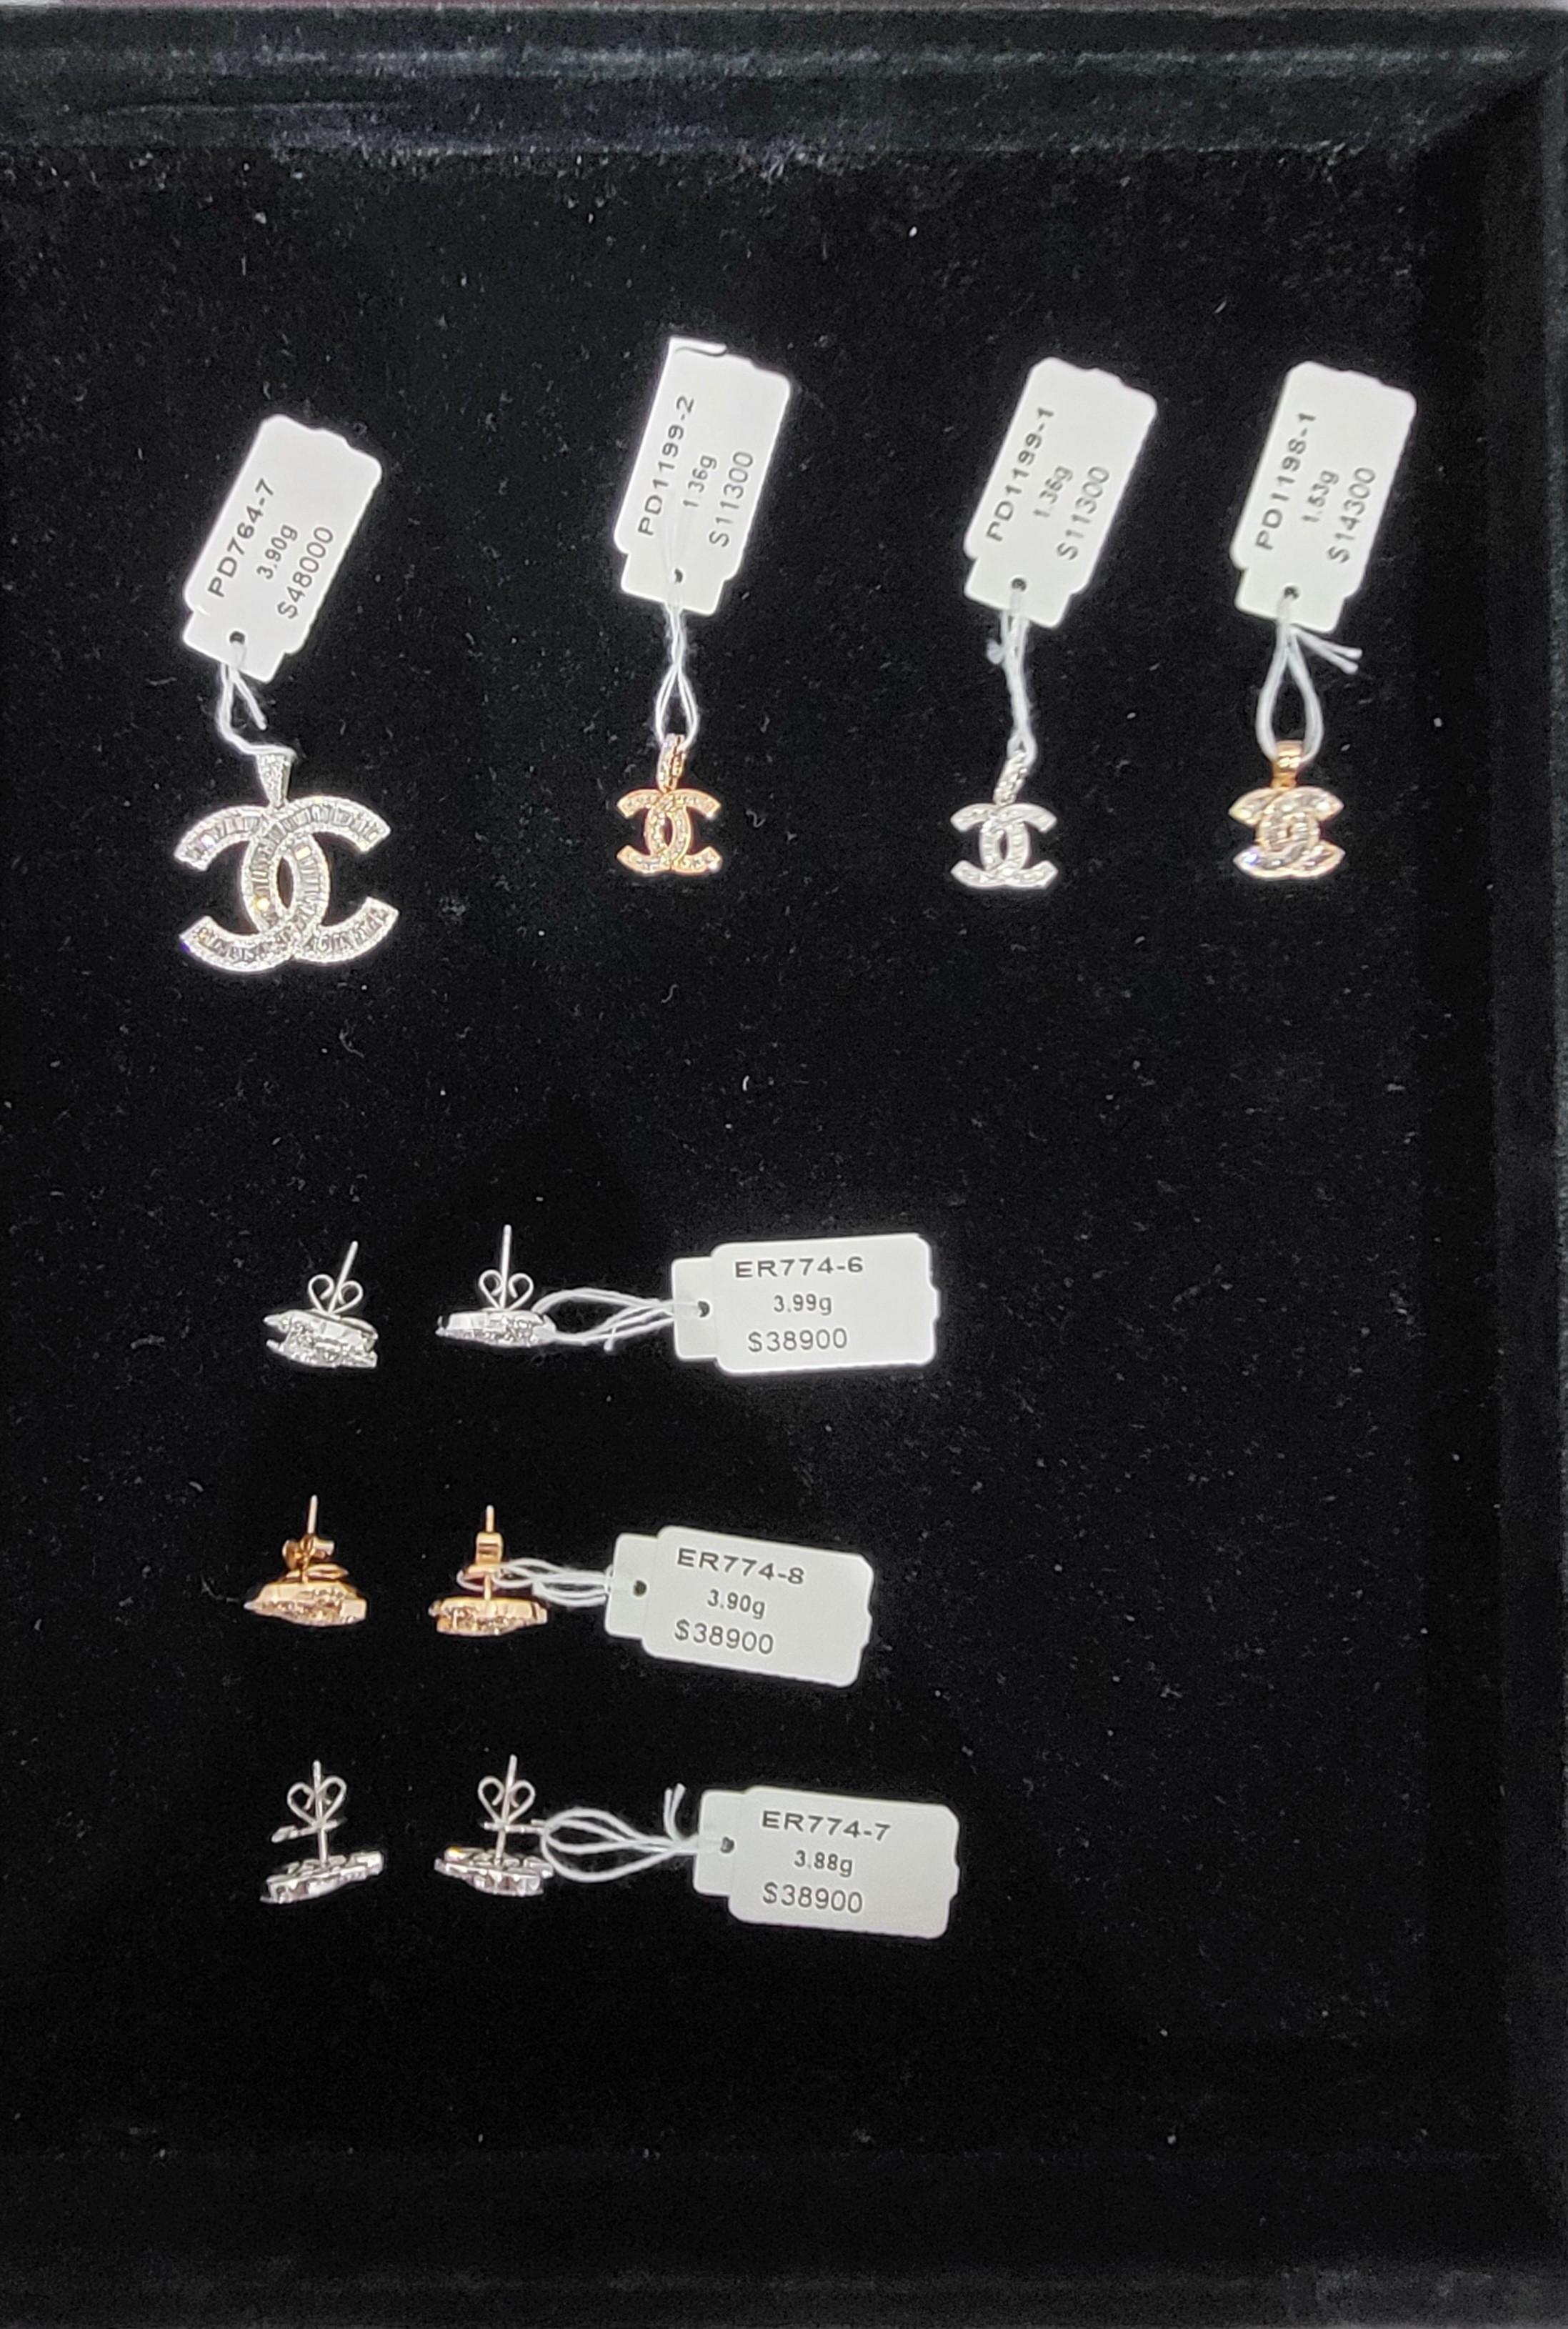 Hong Kong Customs today (June 17) conducted an operation against the sale of counterfeit goods at a fair being held at the Hong Kong Convention and Exhibition Centre and seized about 49 items of suspected counterfeit jewellery with a total estimated market value of about $1.74 million. Photo shows the suspected counterfeit pendants and earrings seized.